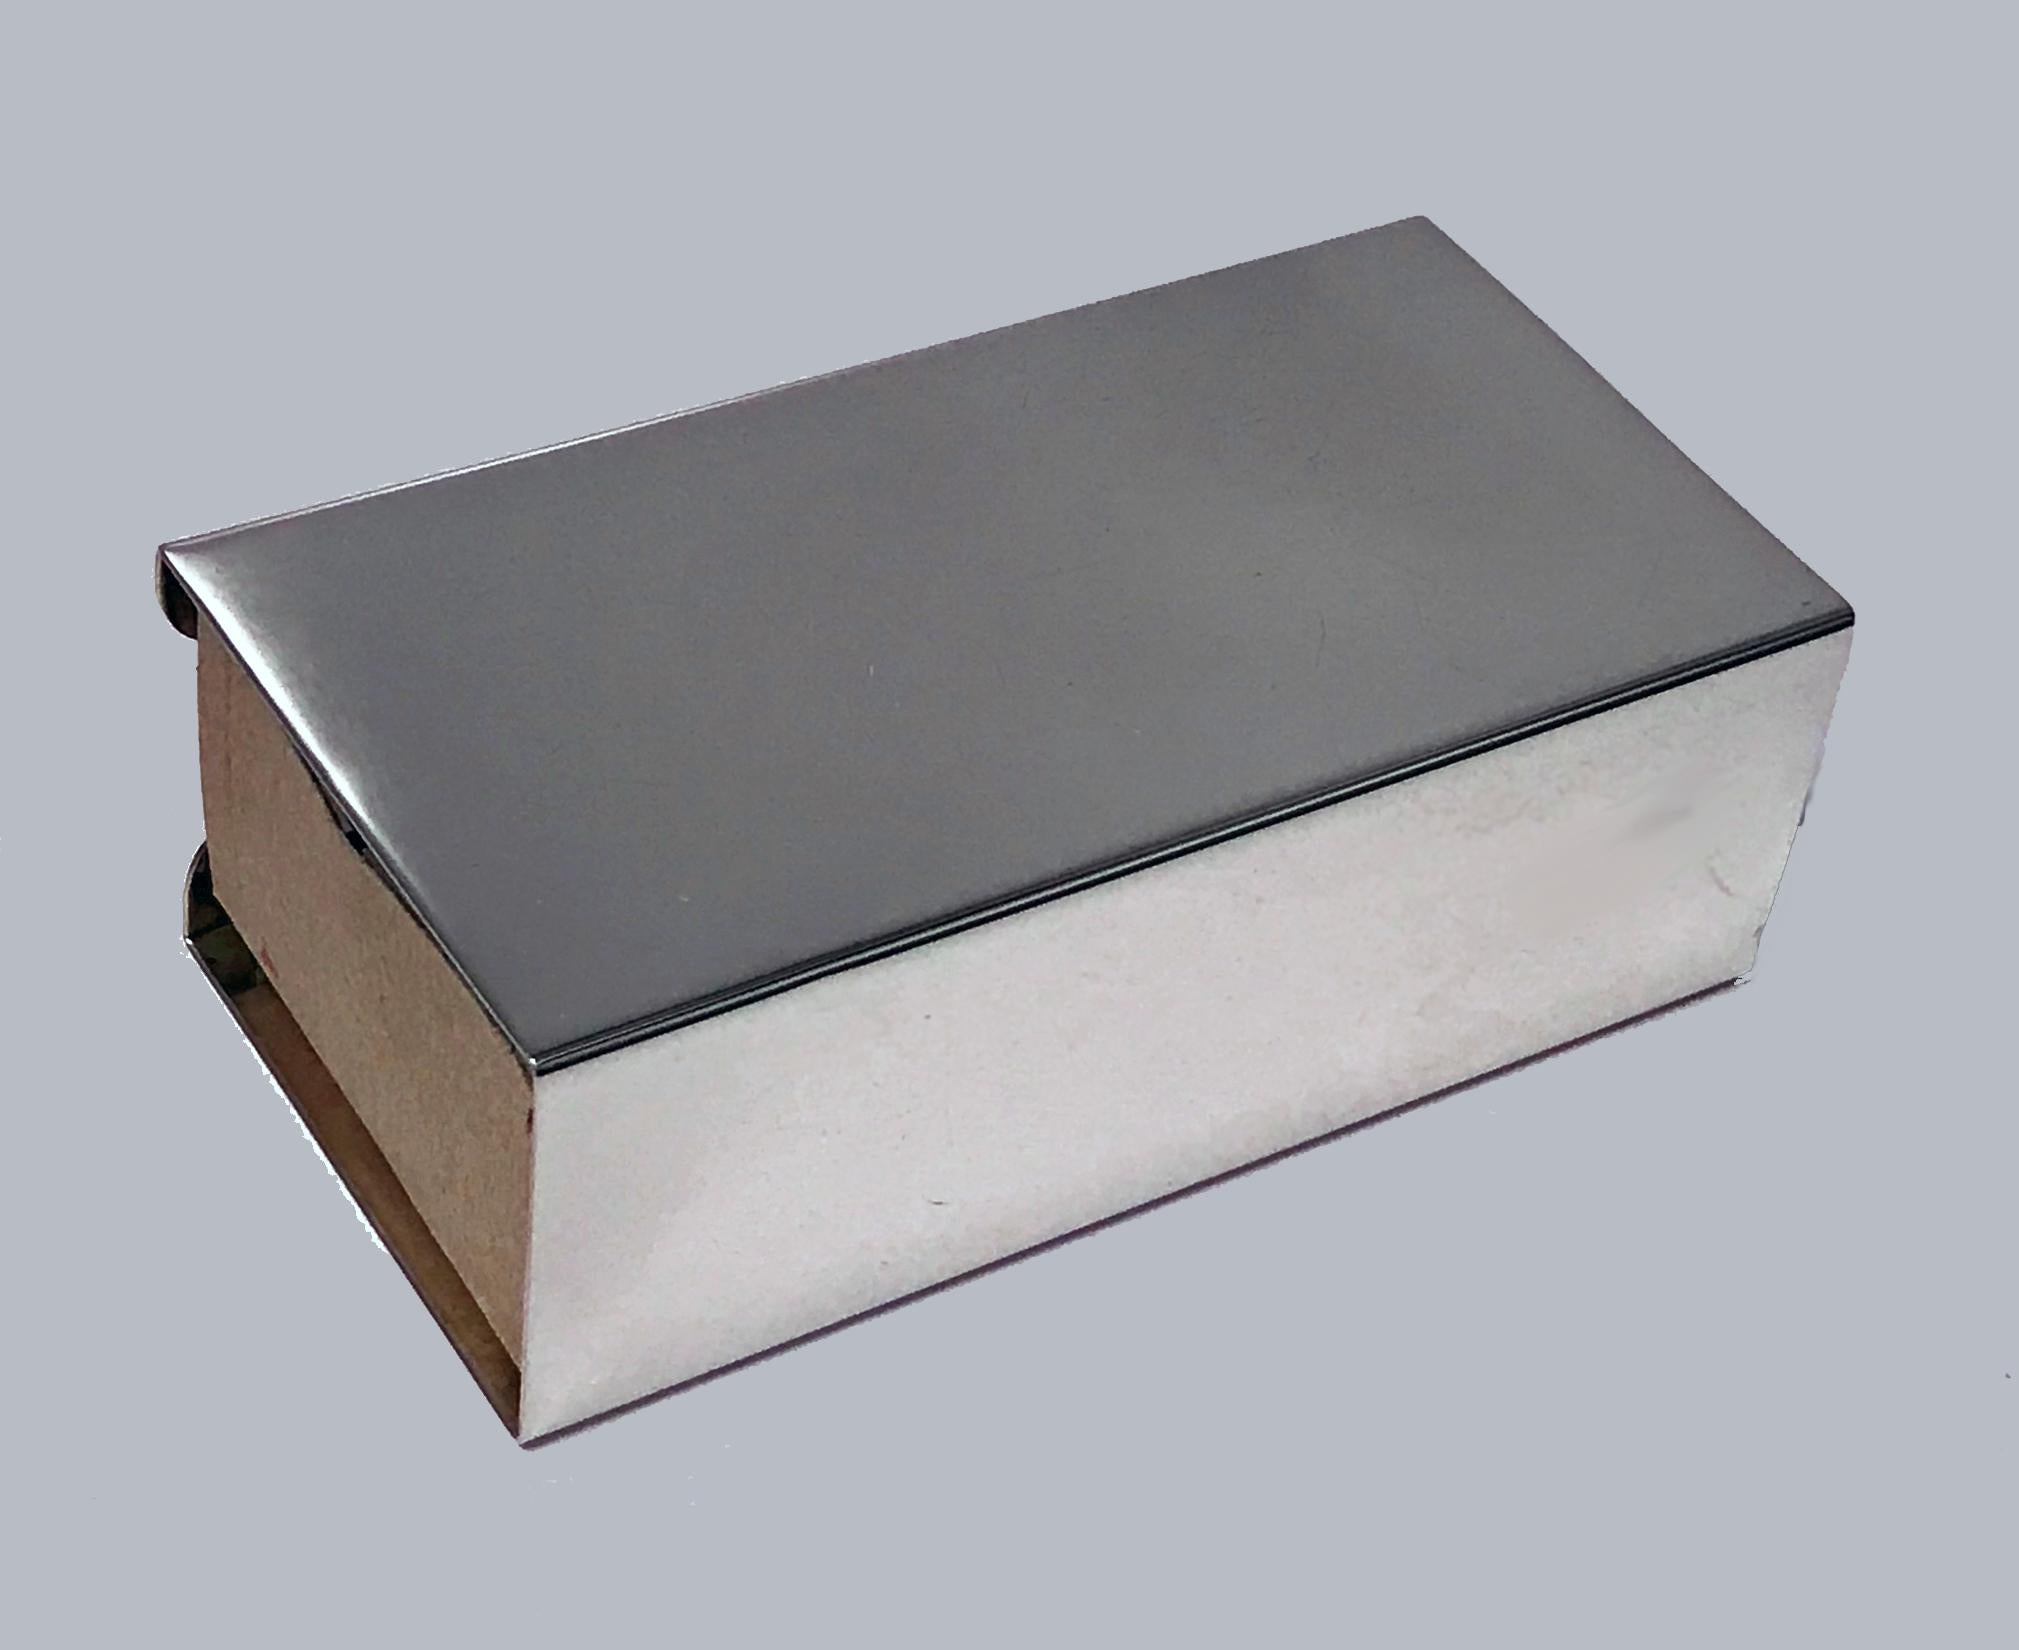 Unusual large heavy American sterling Art Deco table match box vesta case, circa 1930. Plain rectangular shape with open sides to allow for large box. Measures: 5.00 x 2.50 x 1.75 inches. Silver Weight: 235 grams. Heavy gauge Sterling.